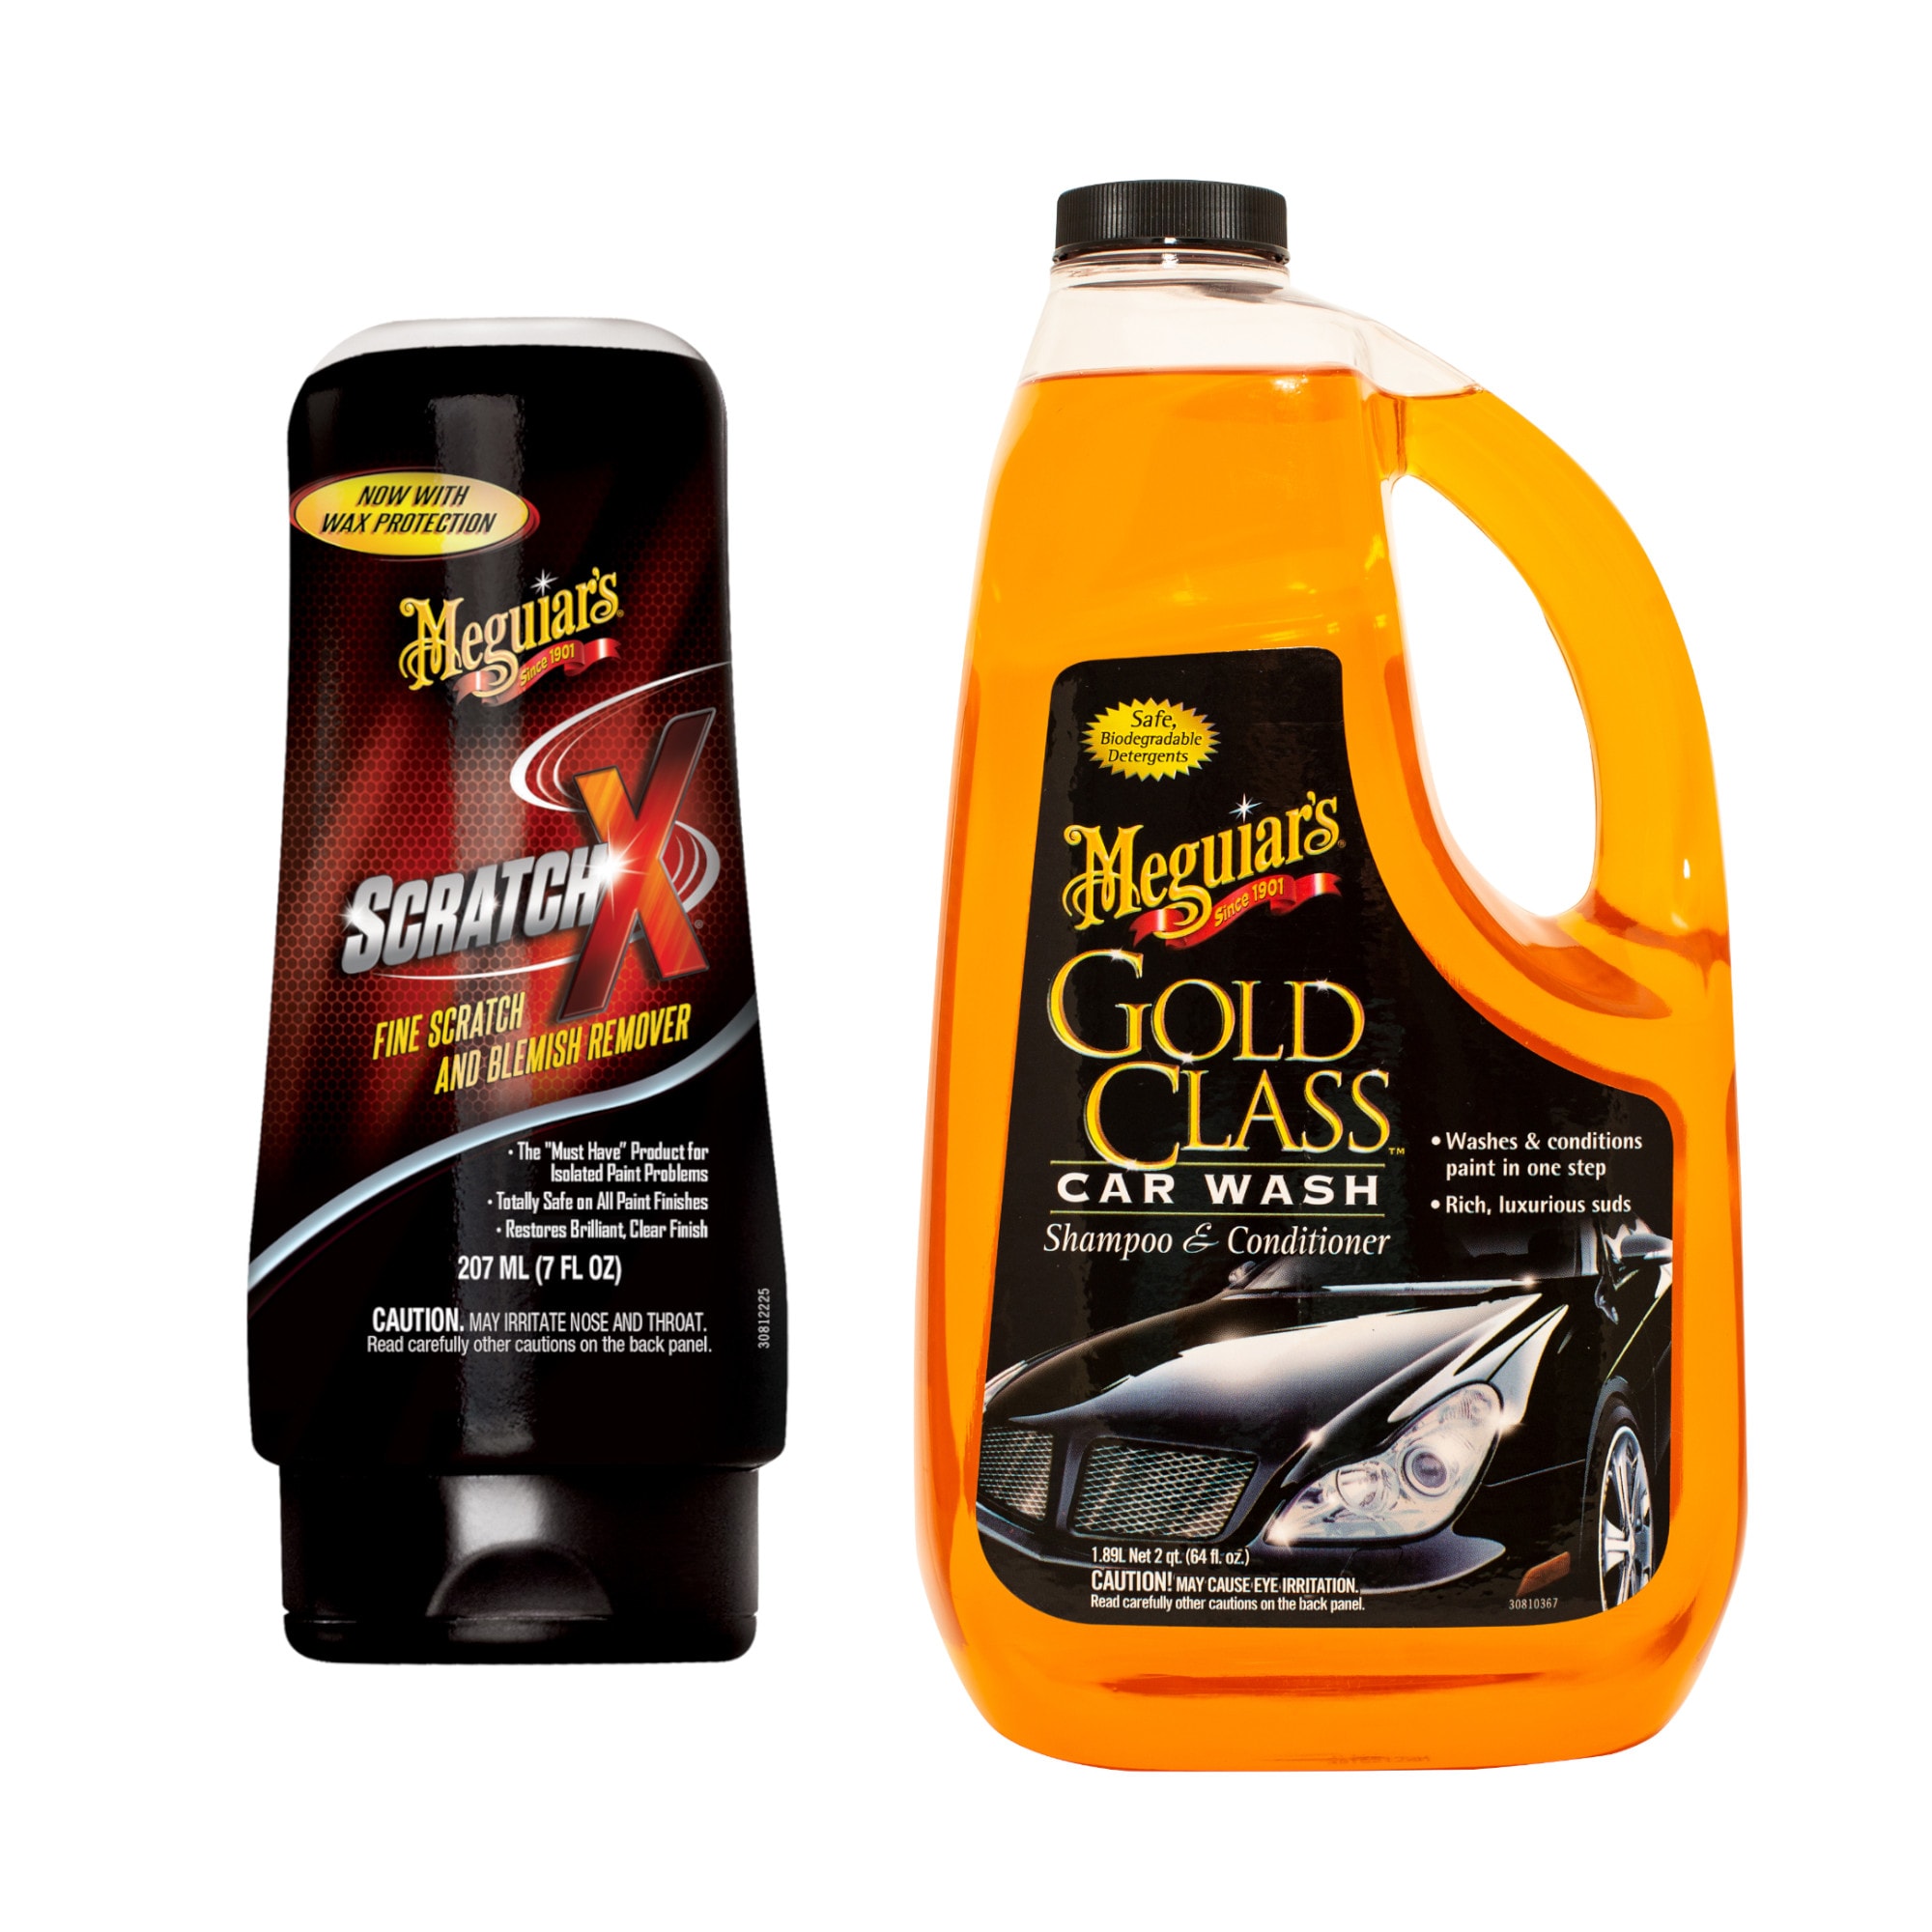 Meguiars Ultimate Products - Parkside Detail and Accessories